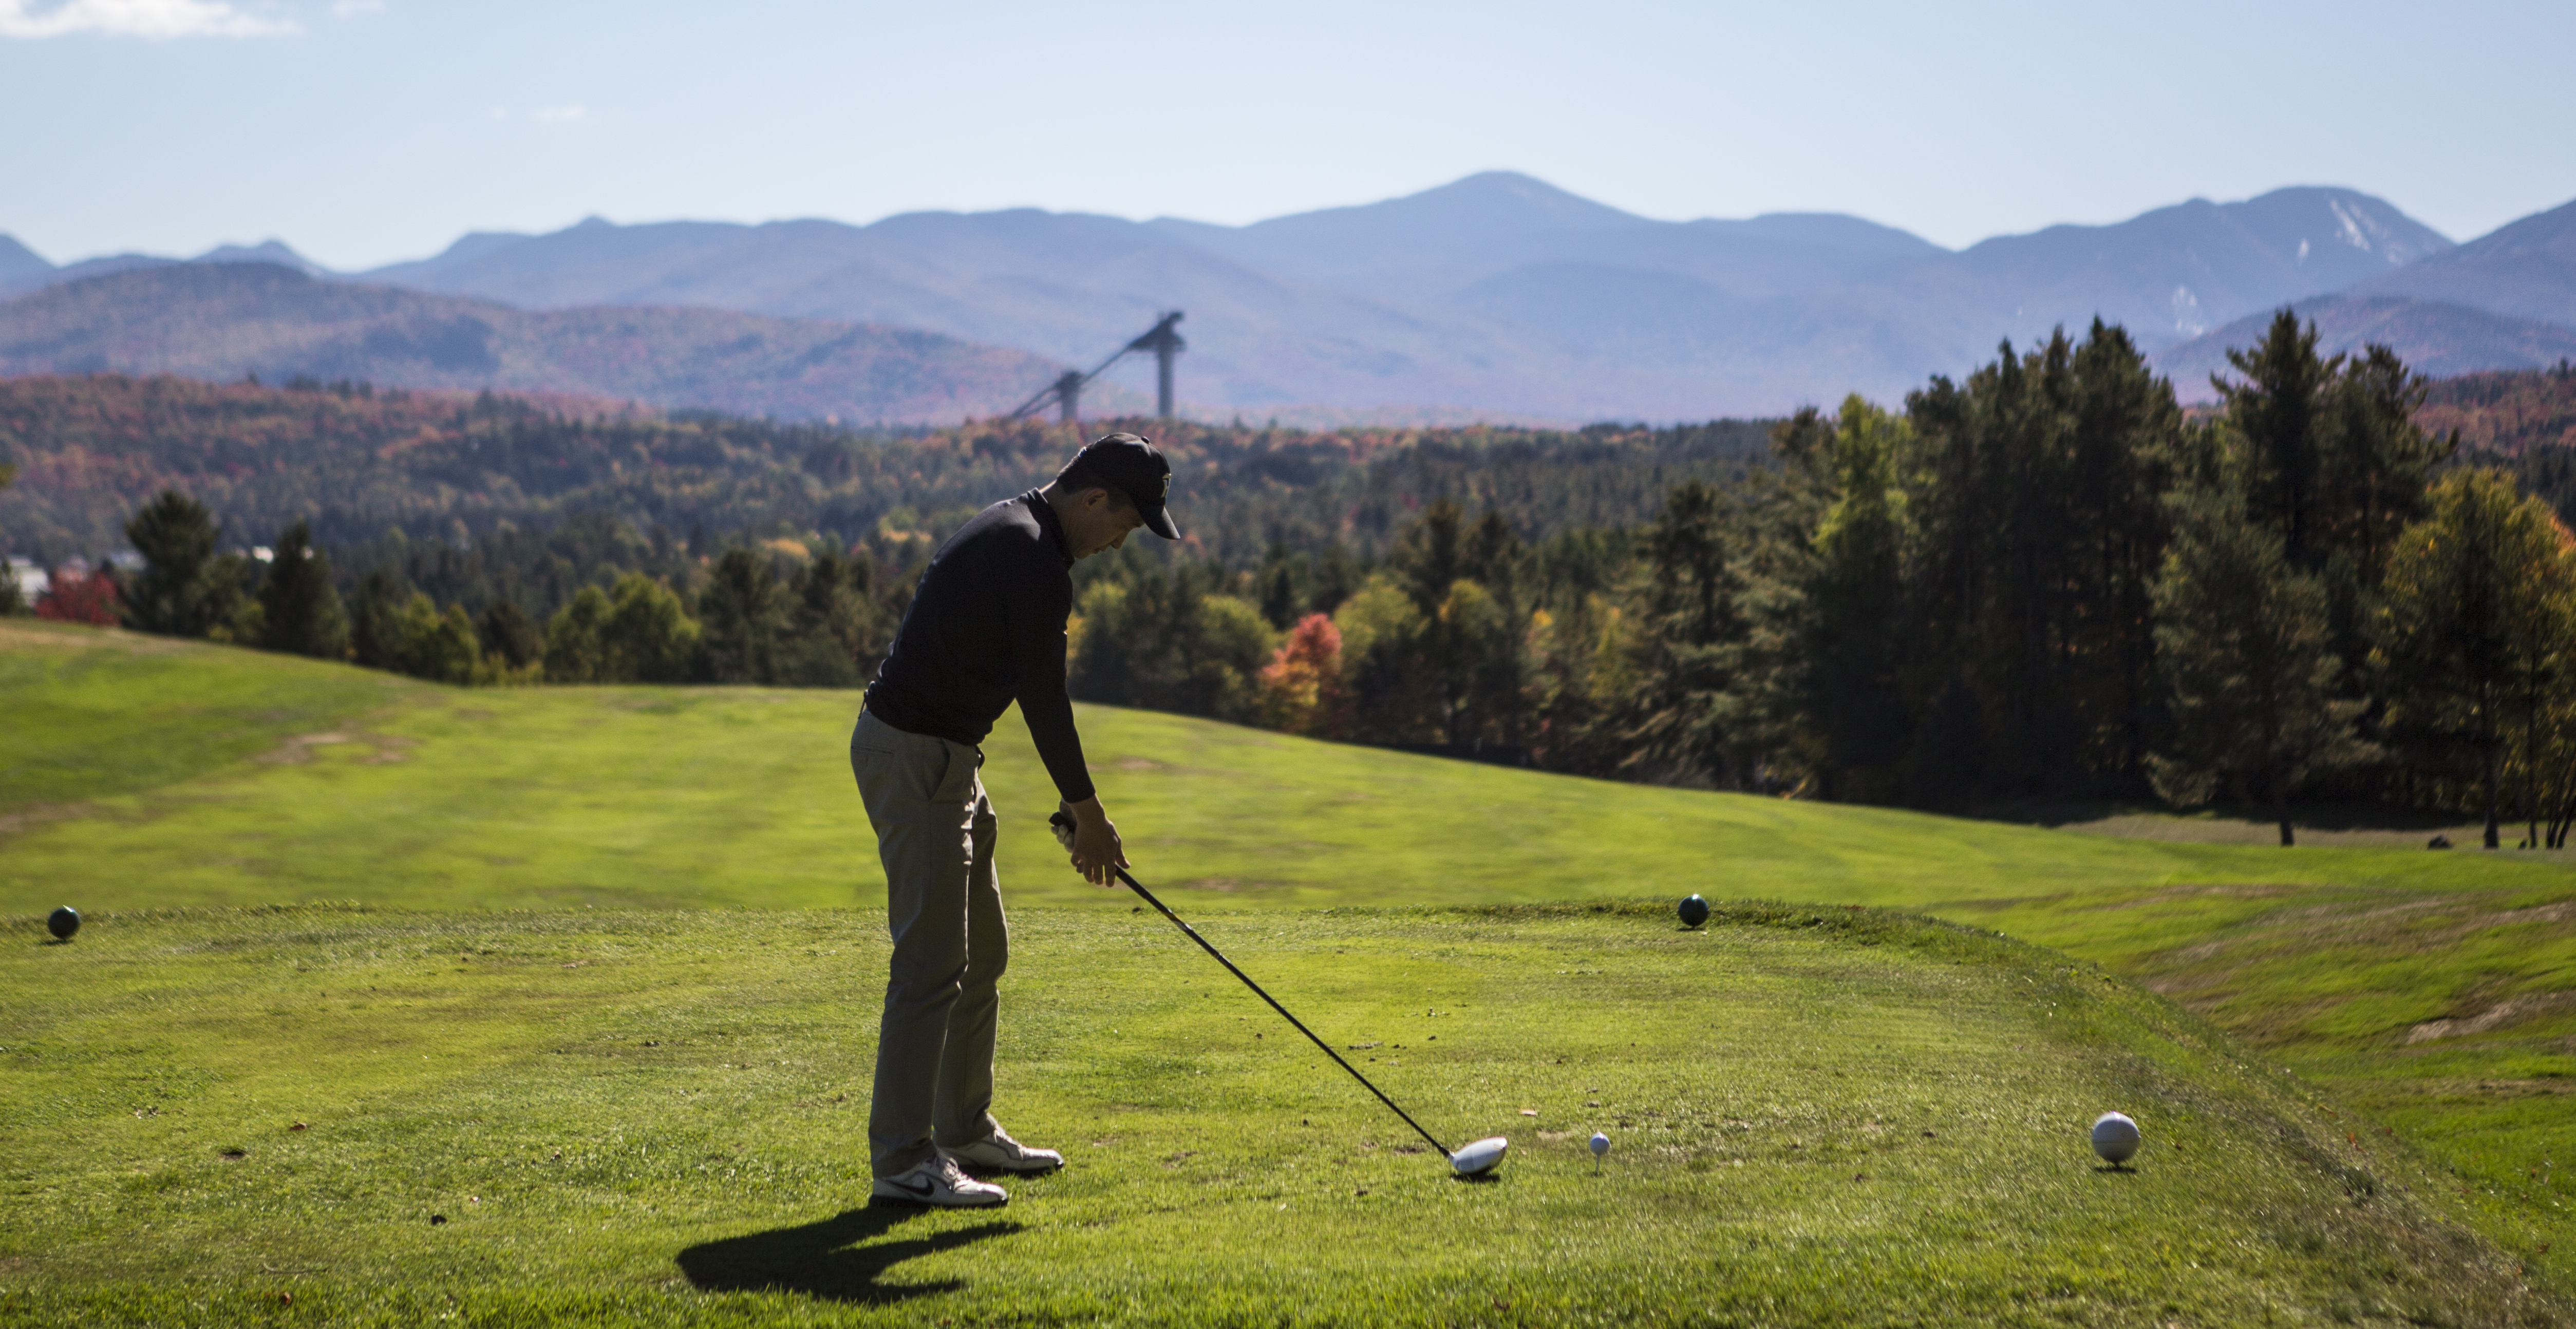 A golfer tees off with the Adirondack High Peaks and Olympic ski jumps in the background.